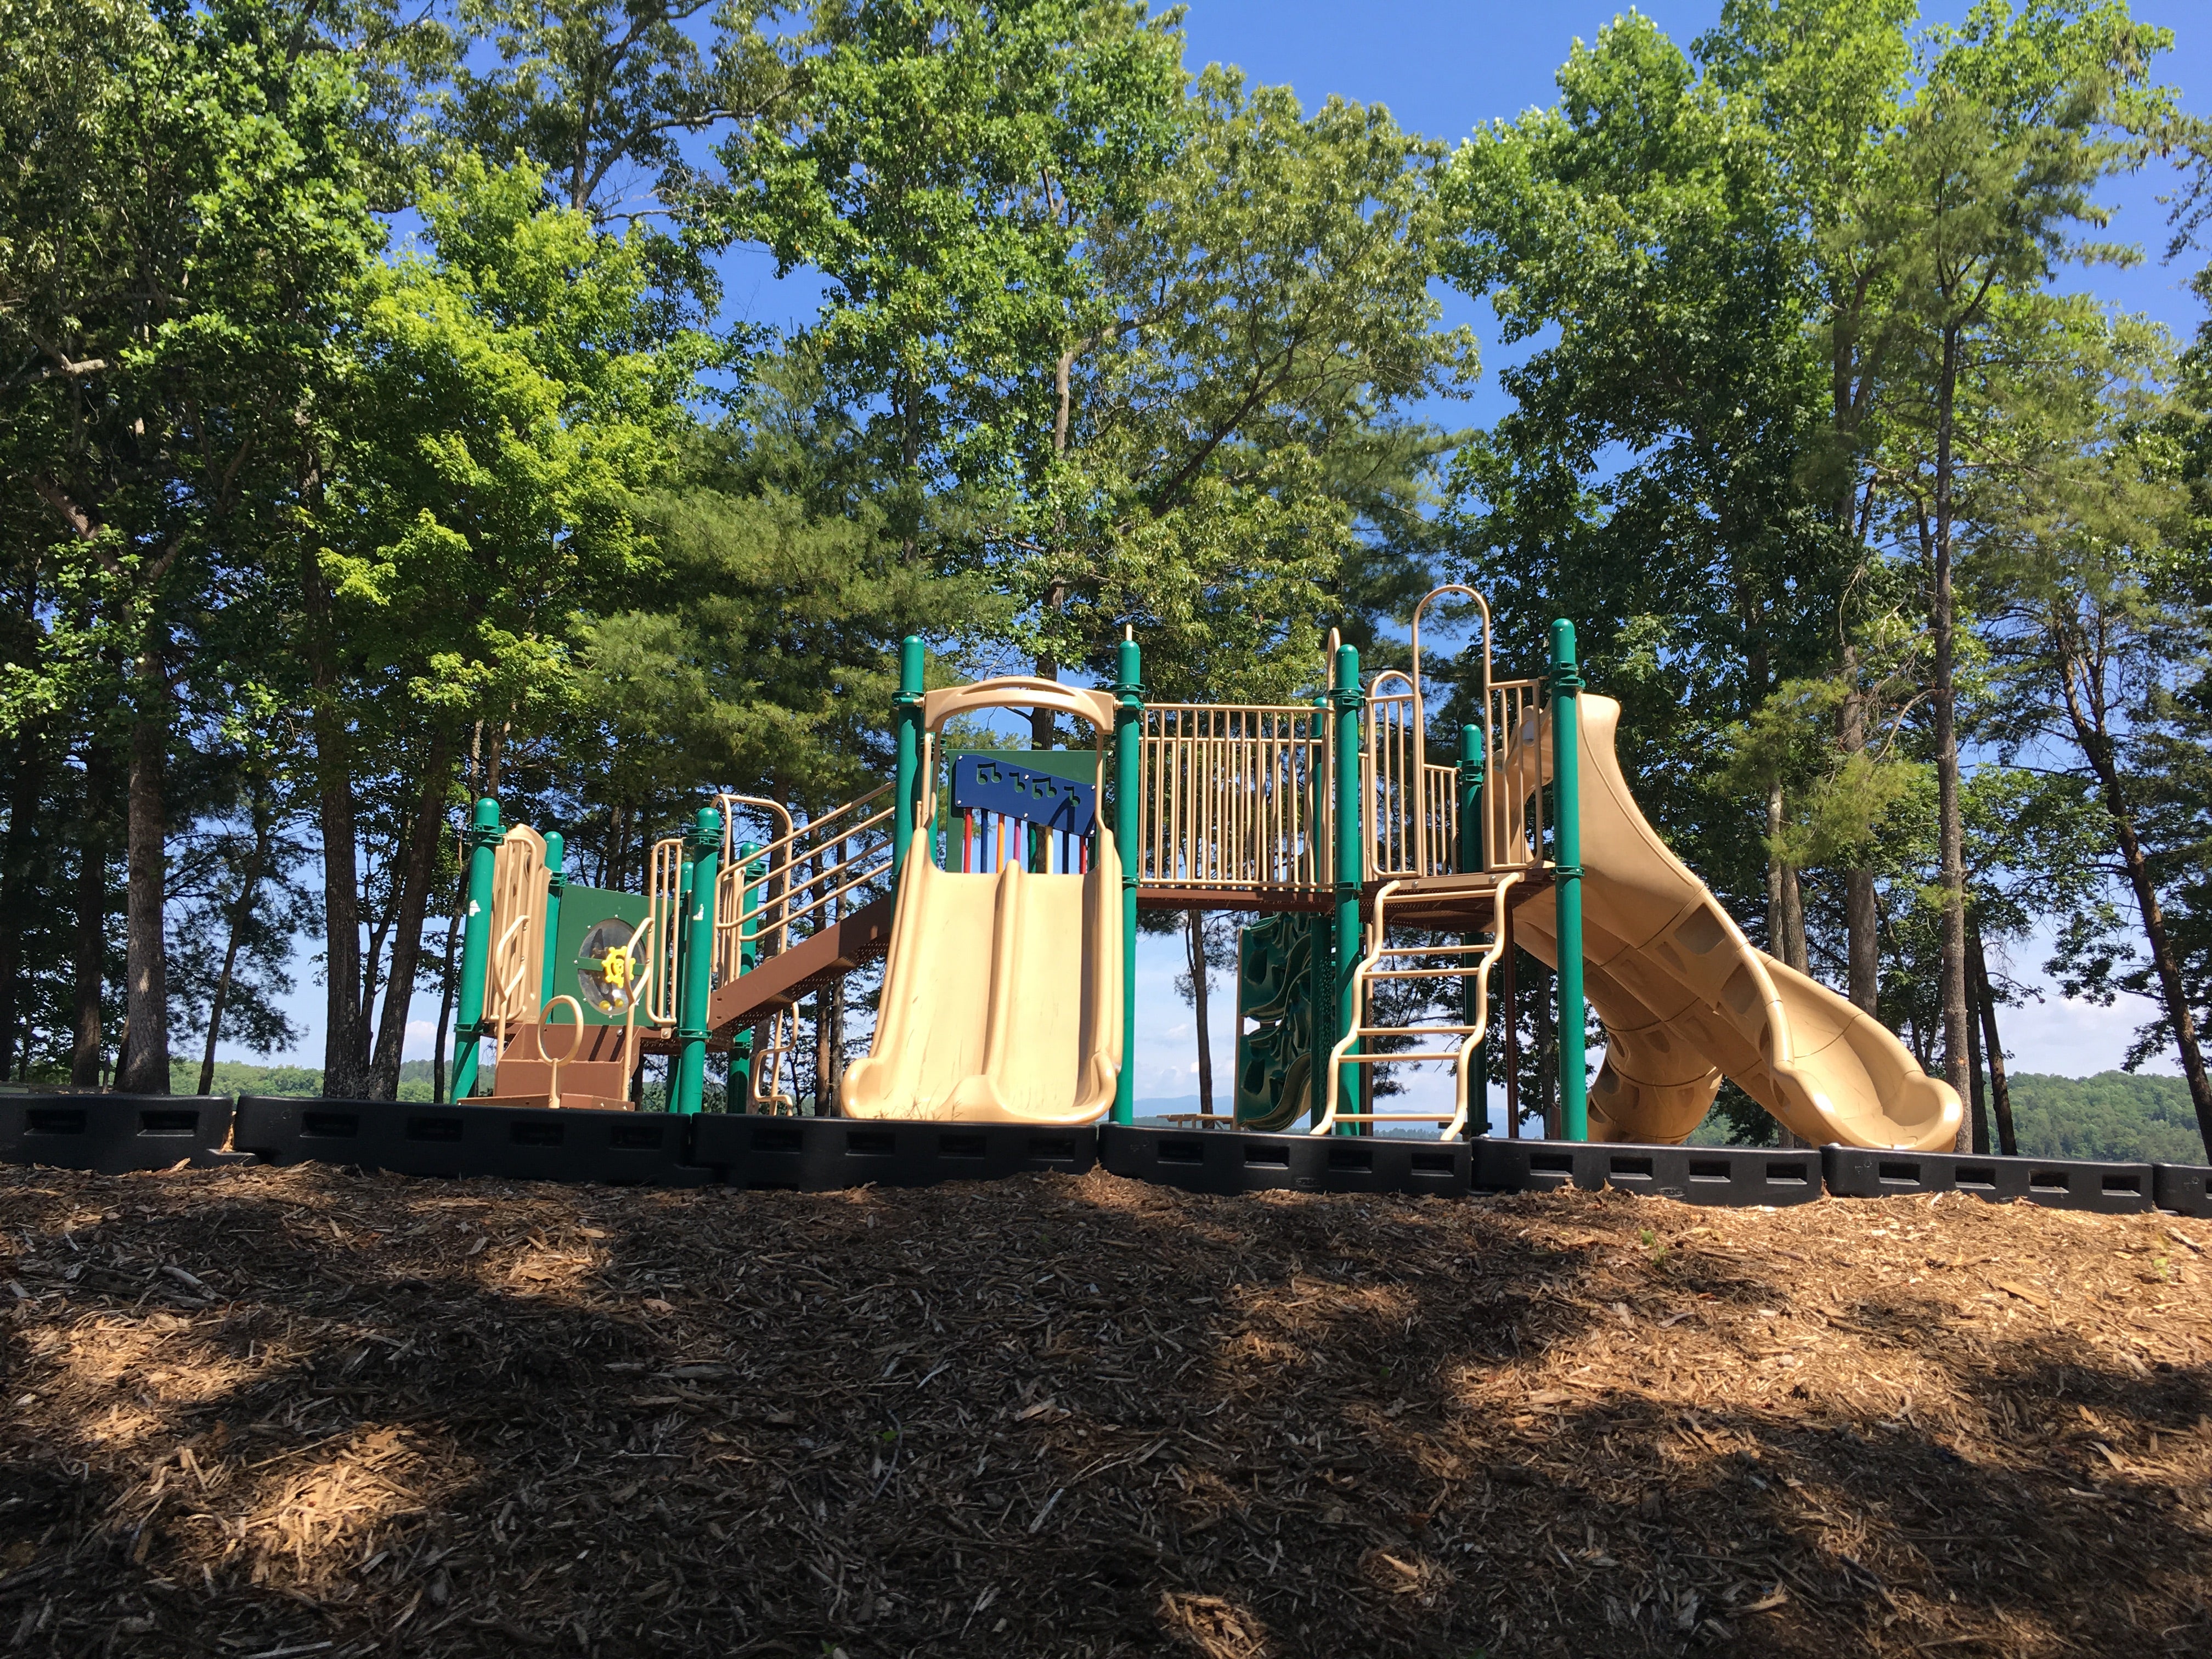 Several playgrounds located in camp grounds